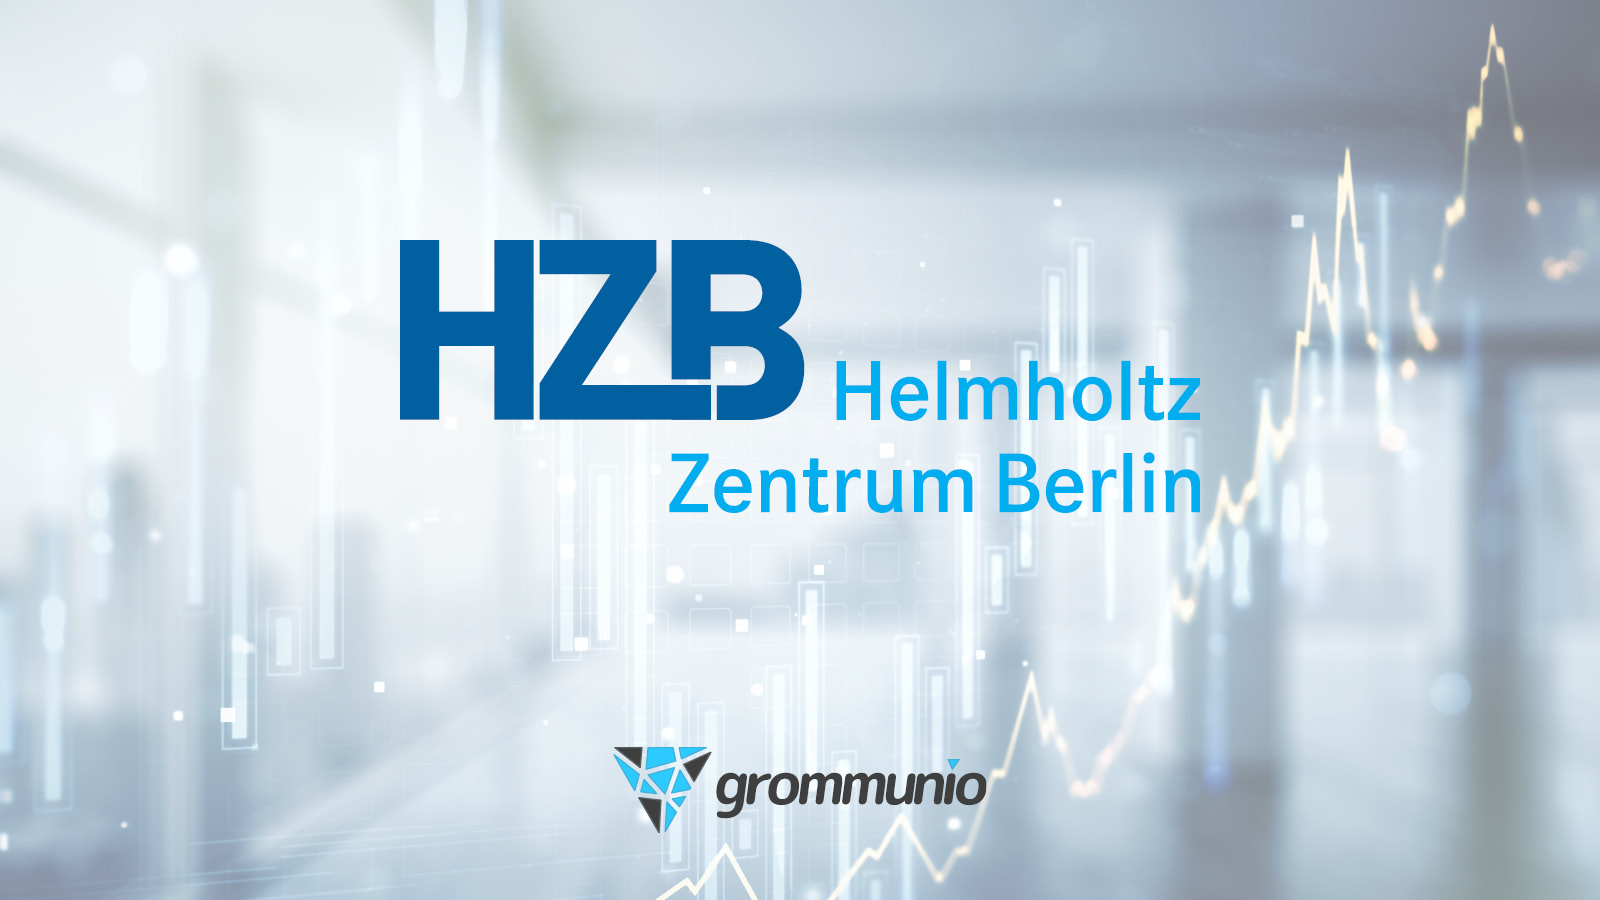 HZB: High-tech research center is relying on grommunio